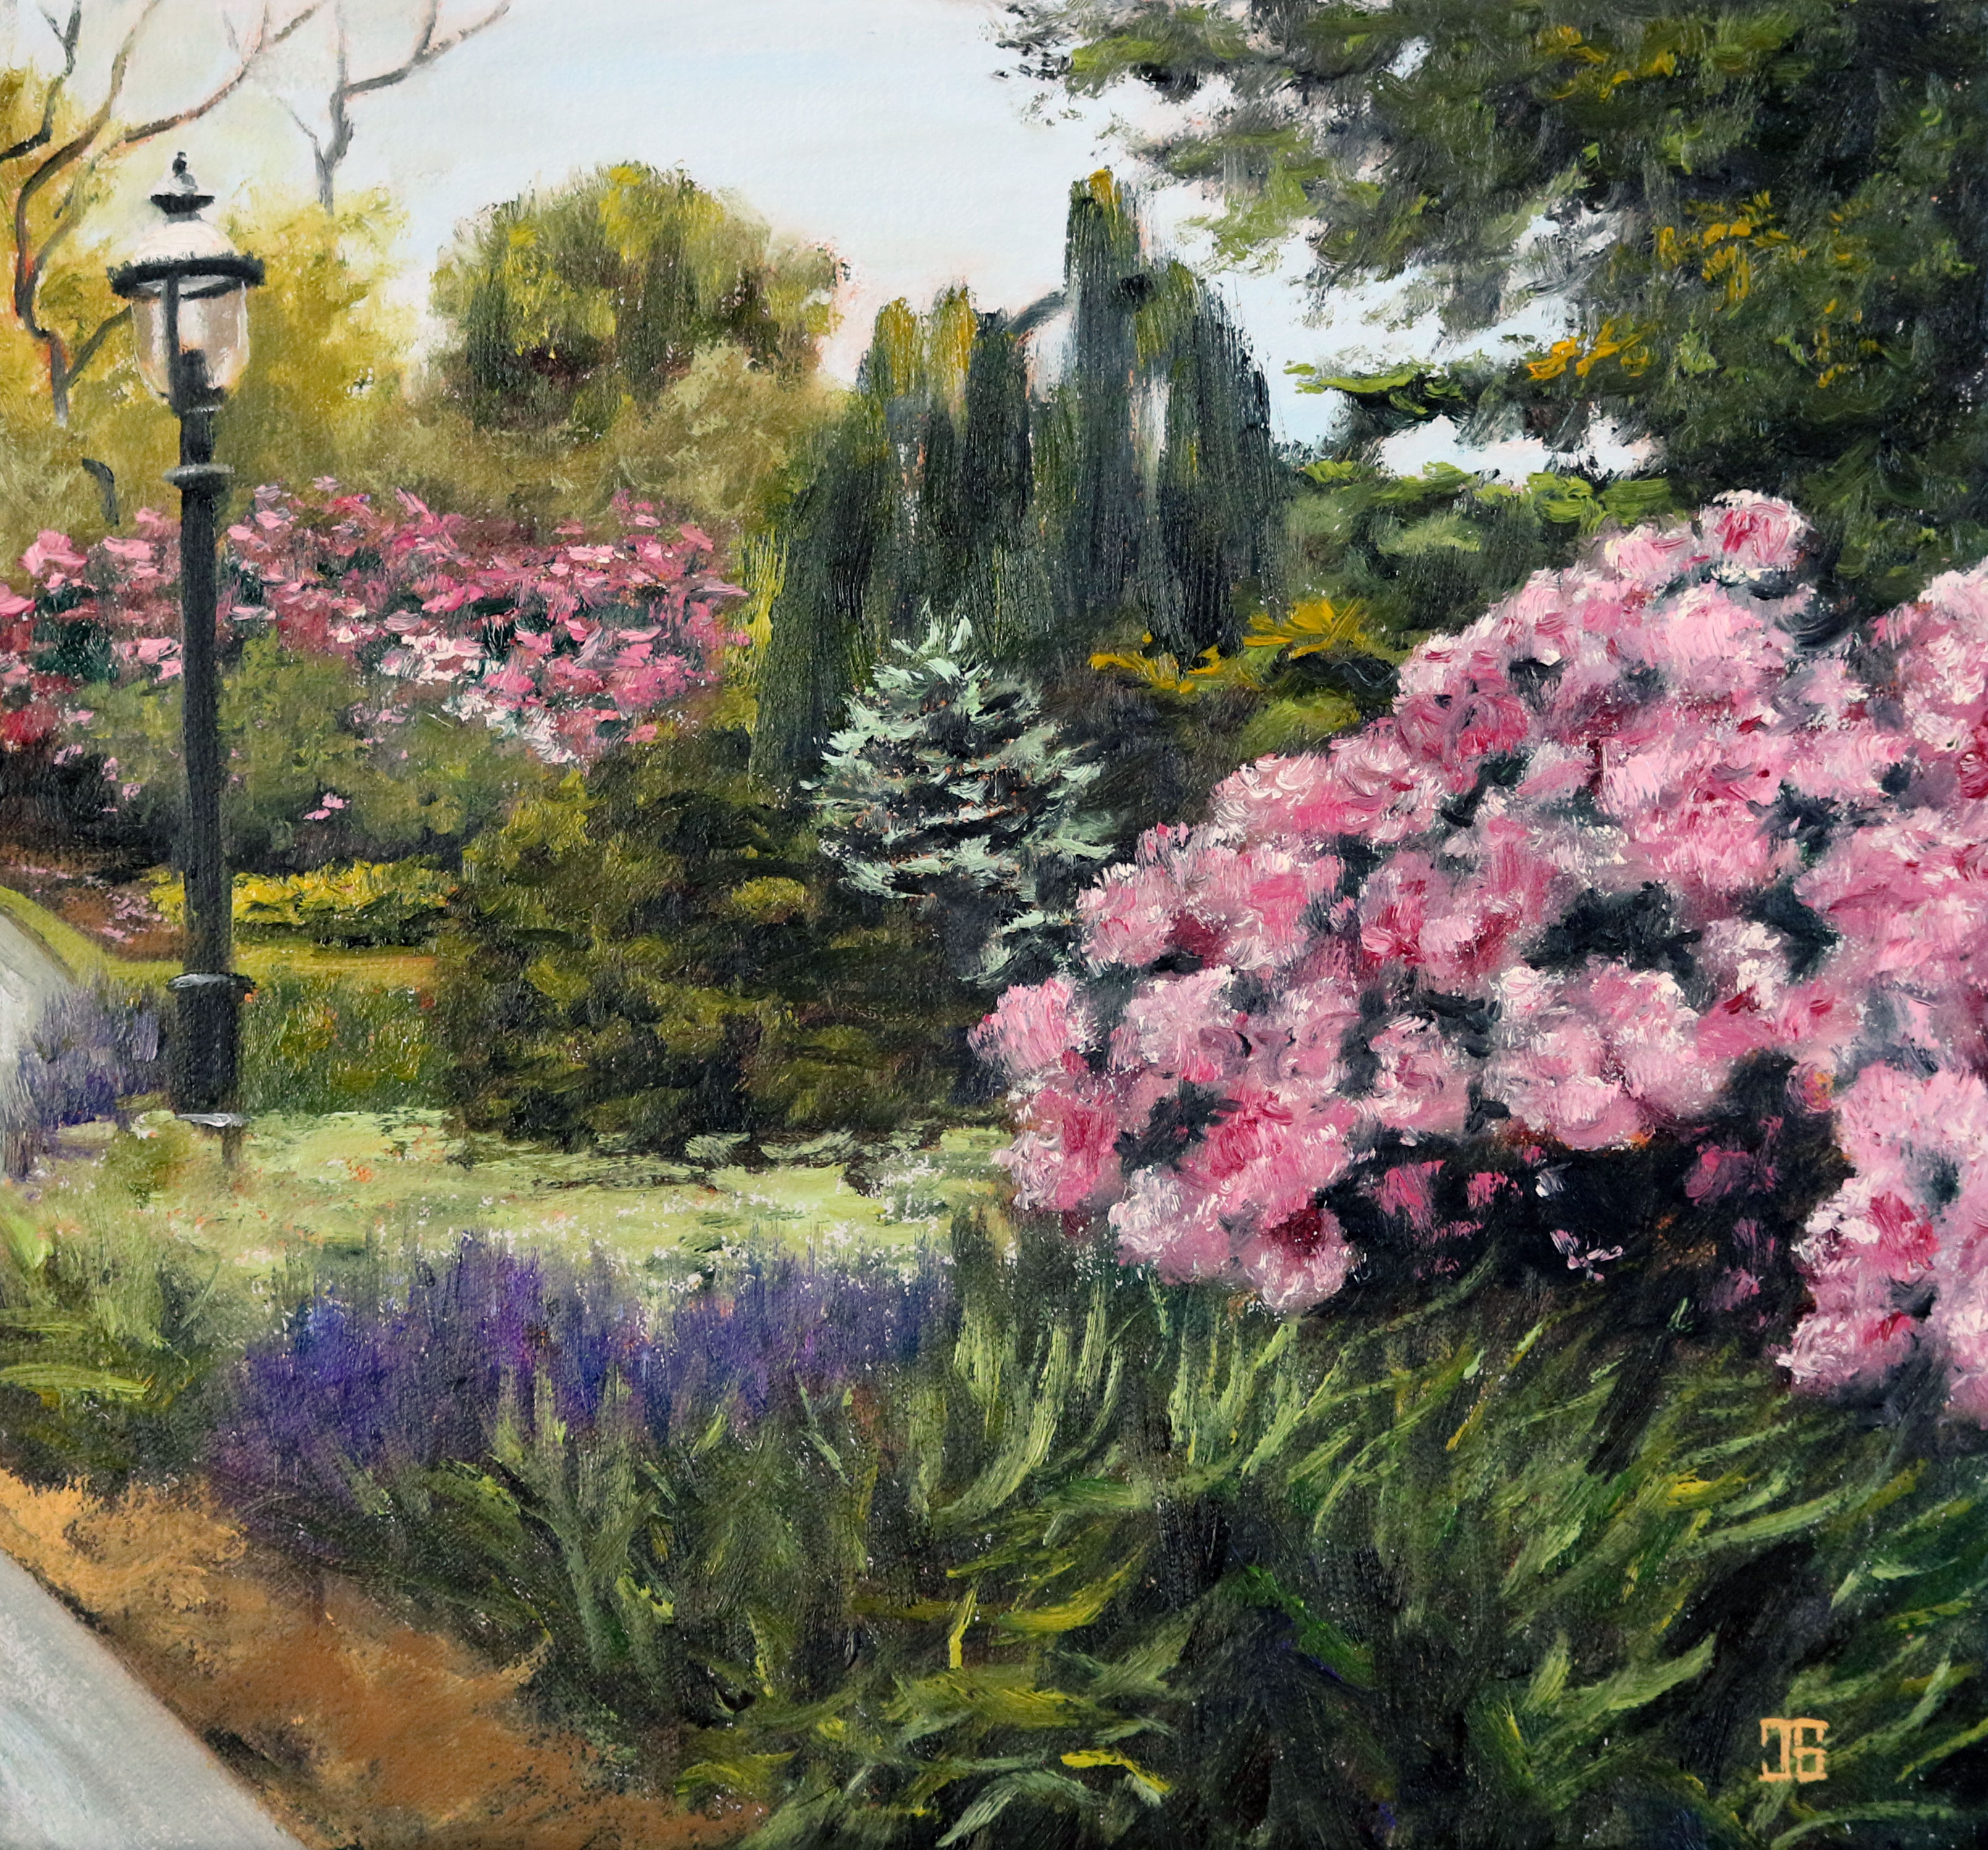 Oil painting "Scenic Park" by Jeffrey Dale Starr